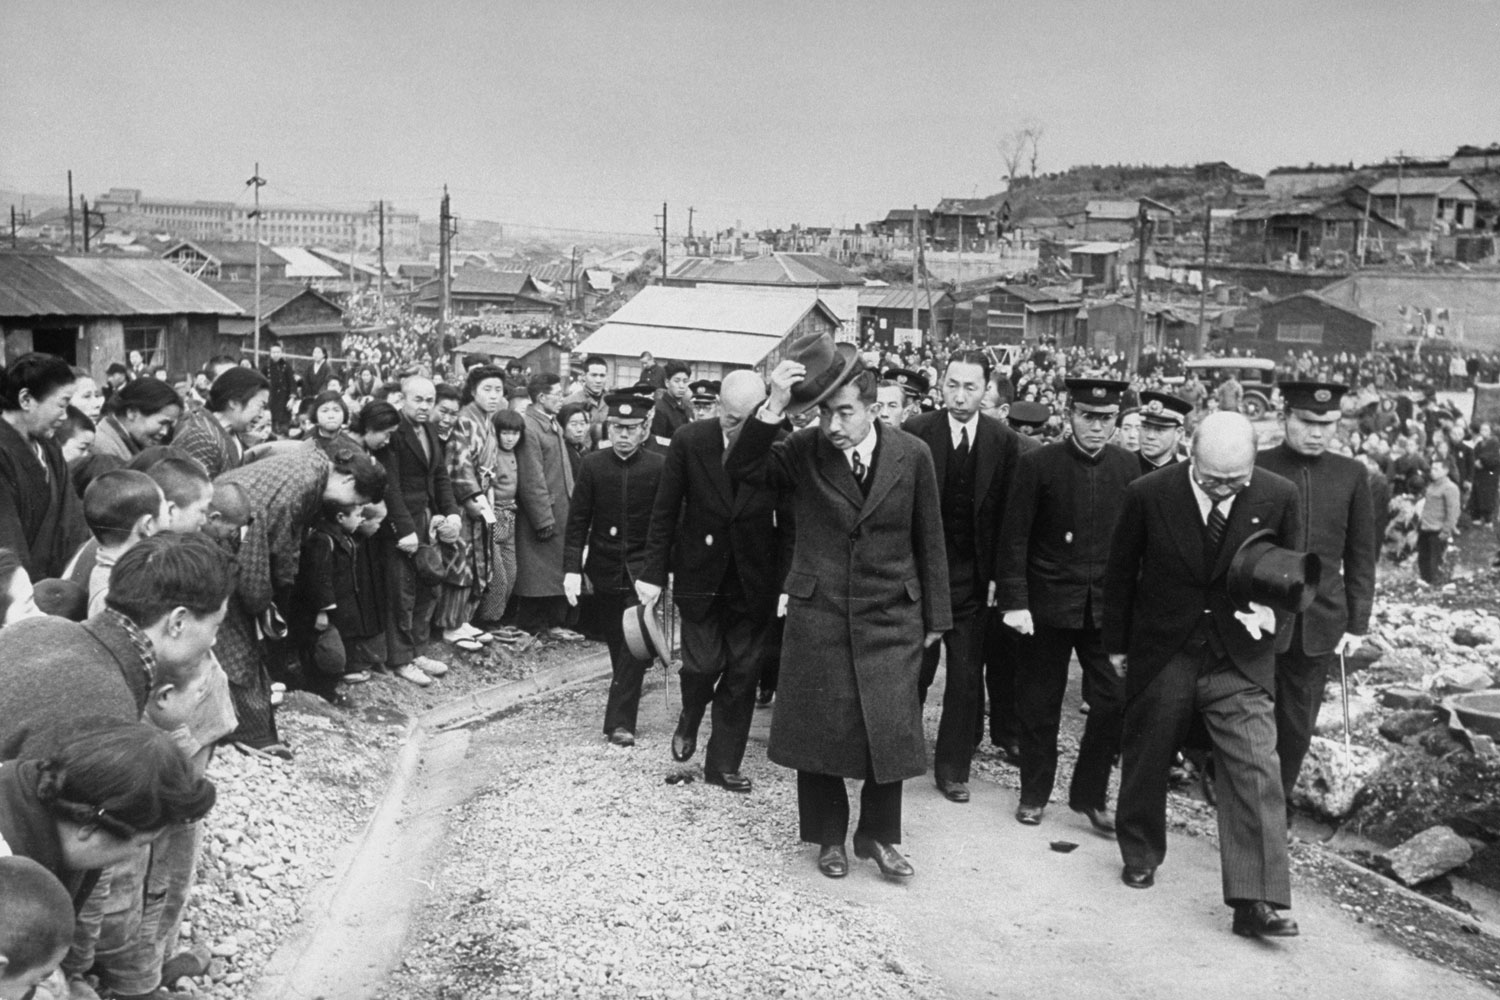 Japan's Emperor Hirohito in Yokohama during his first visit to see living conditions in the country since the end of the war, February 1946.